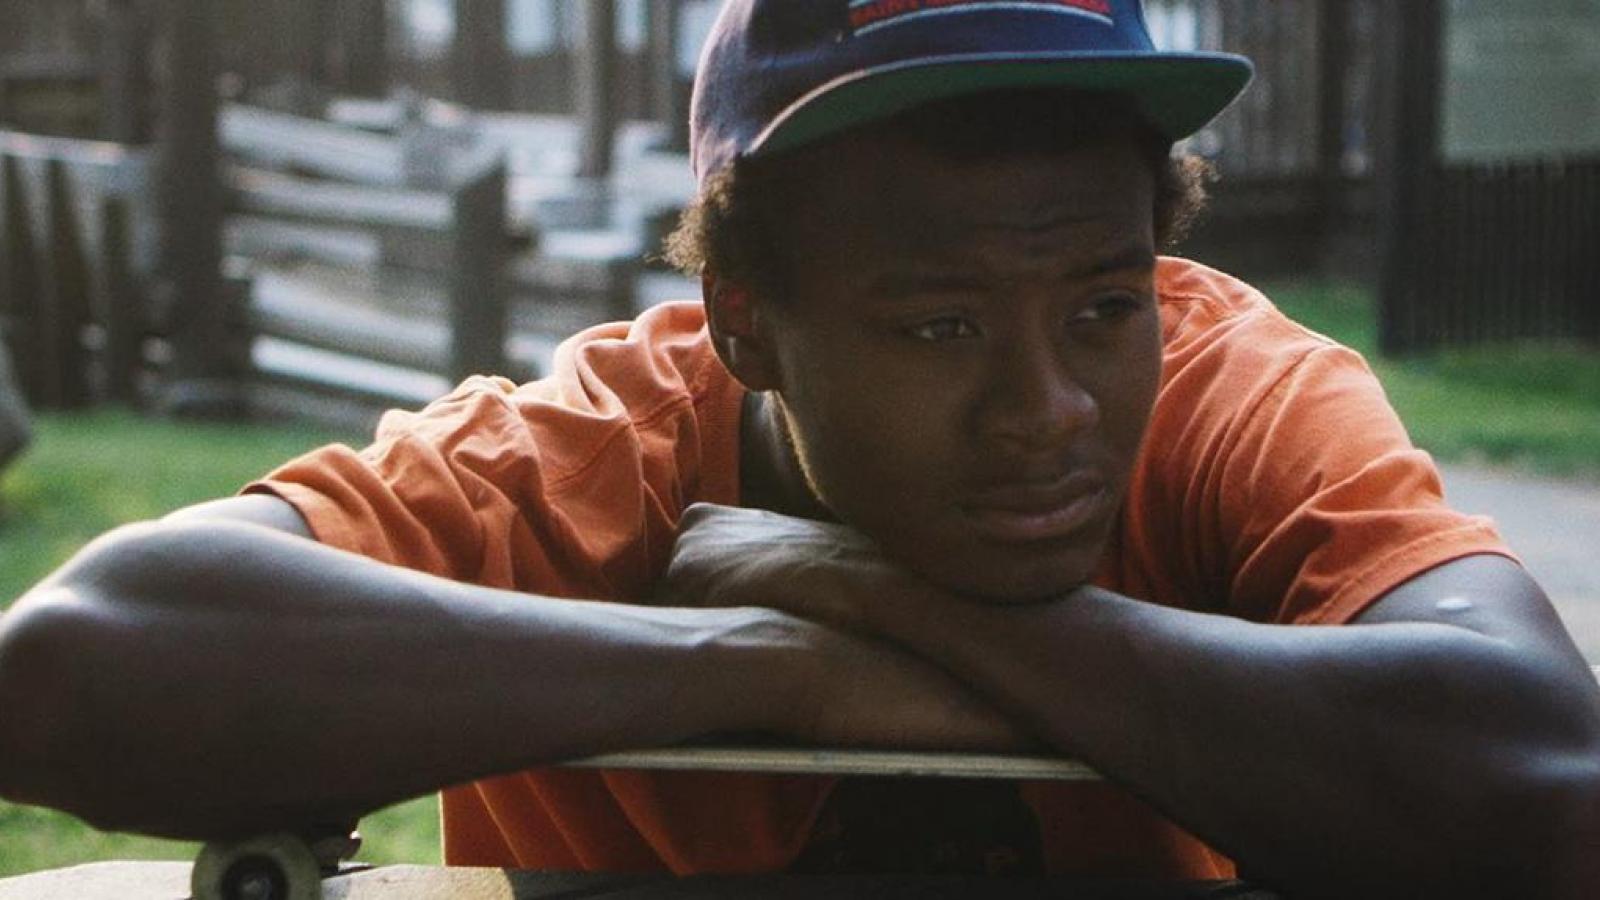 Free Screening & Discussion: Minding the Gap